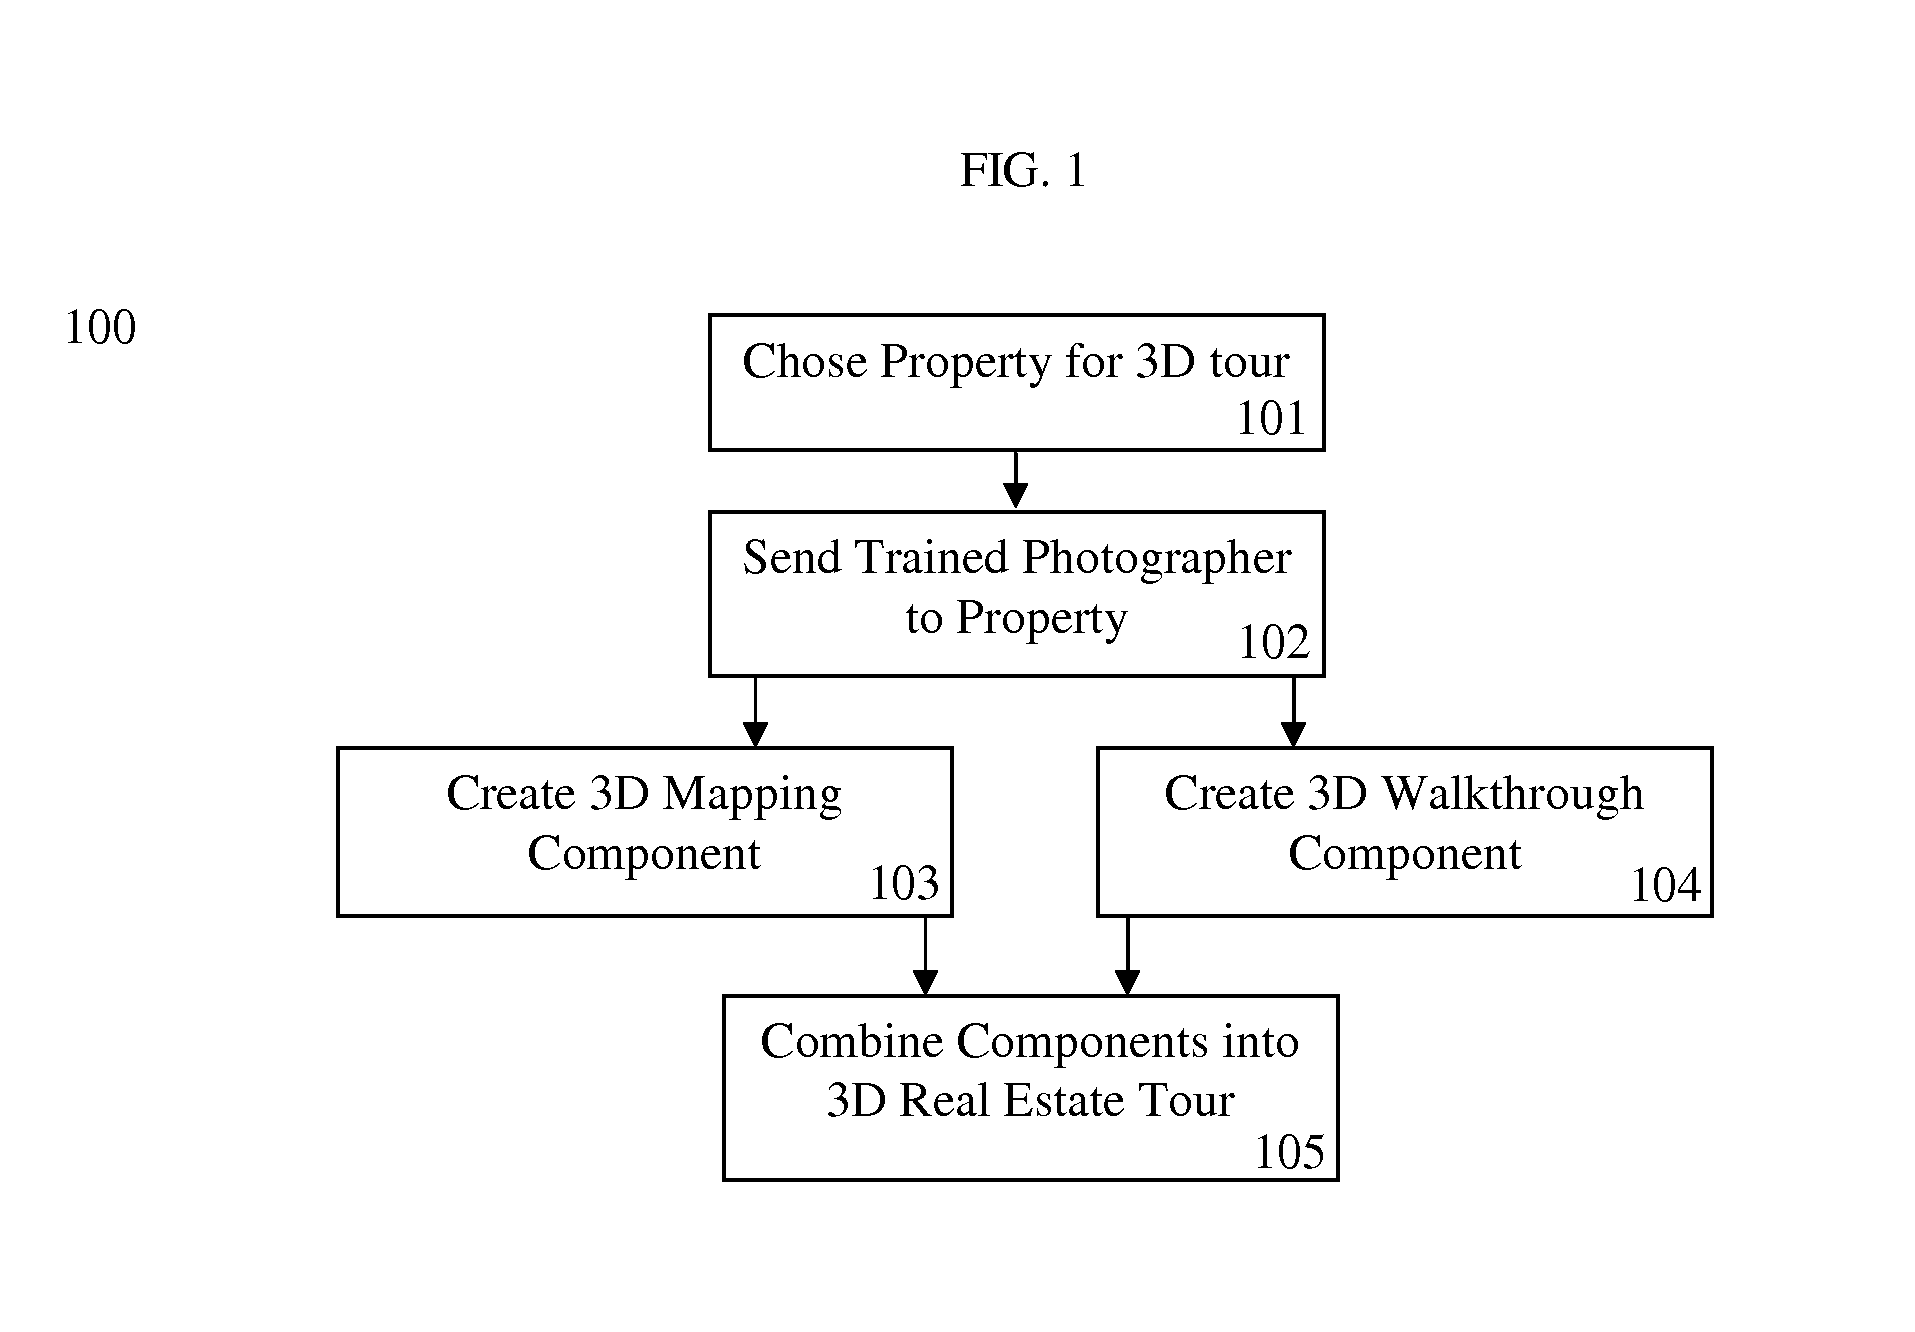 Multi-component method of creating computer models of real estate properties for the purpose of conducting virtual and interactive real estate tours